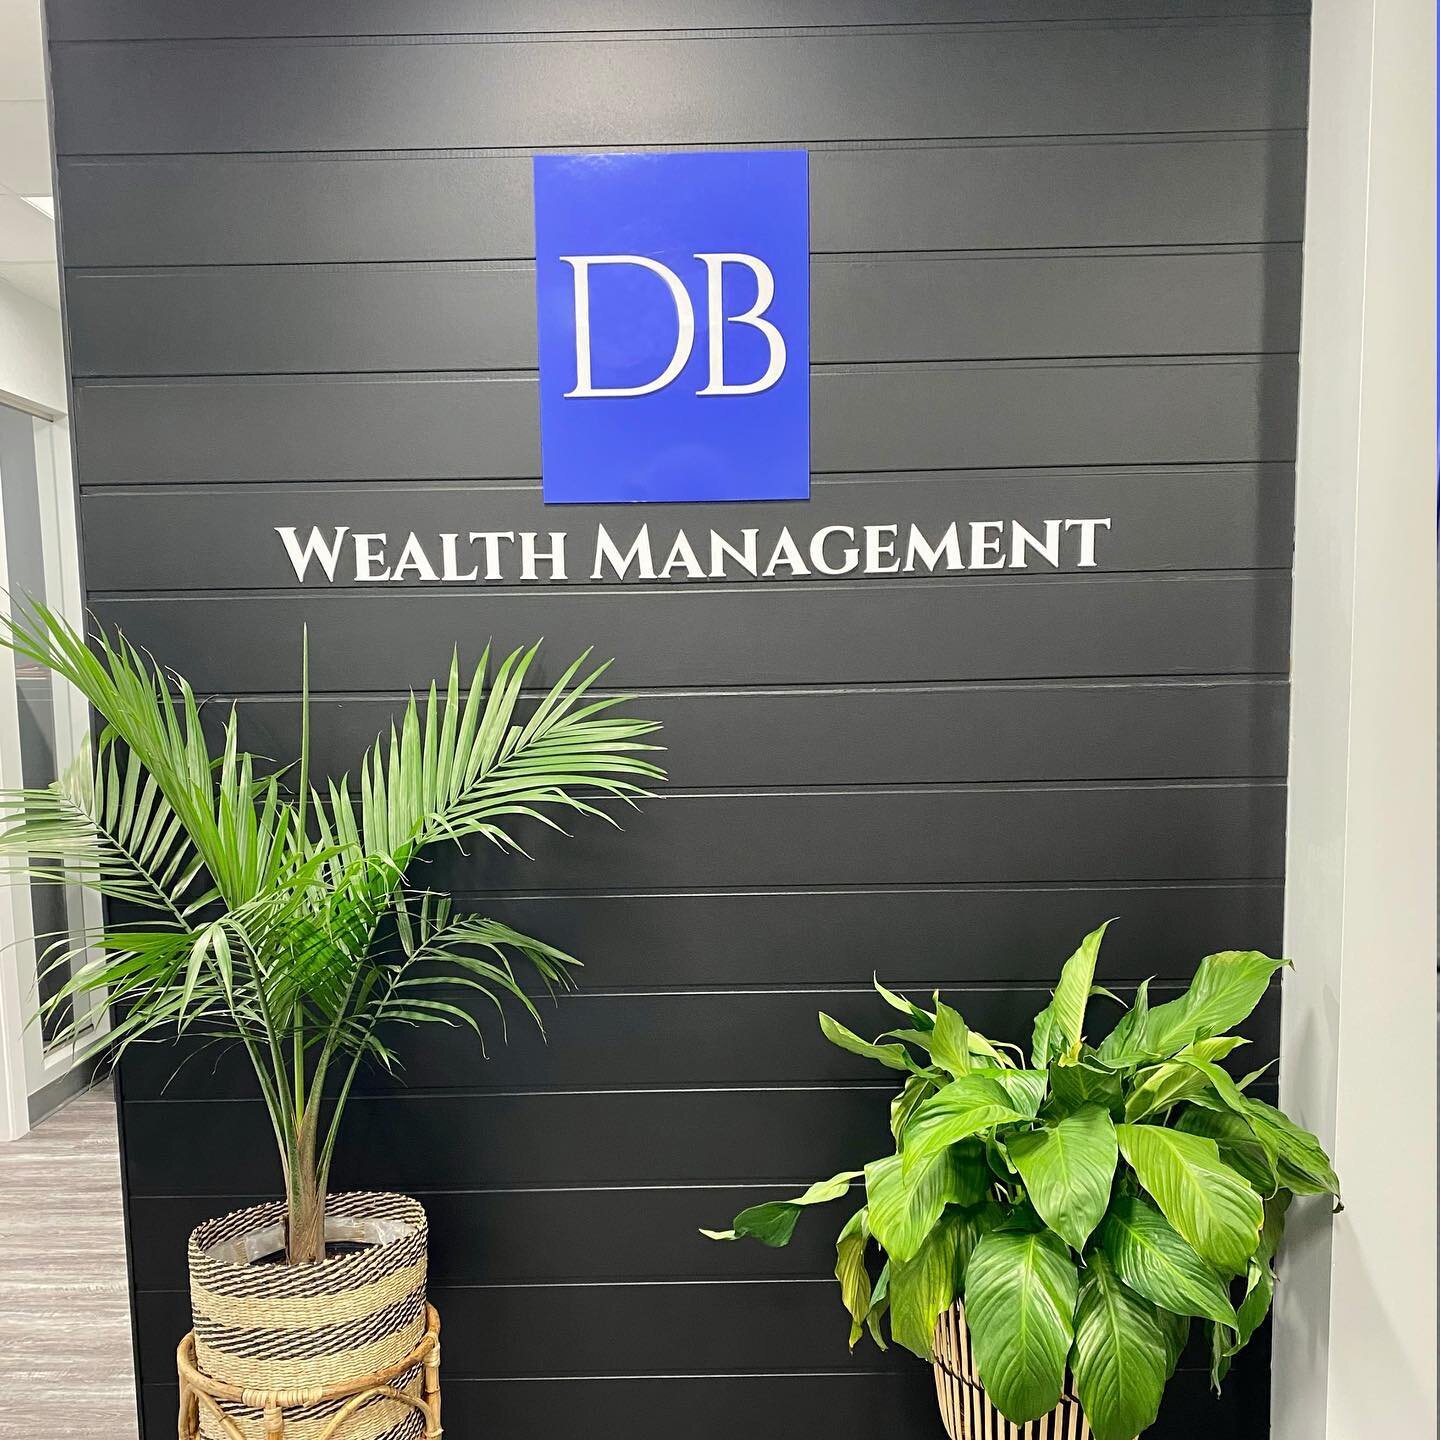 A big thank you to Korey at @signkore for our new signage and to @russdawson for our feature wall. Thanks for the slick new look. 
.
.
.
.
.
.
.
.
.
#newsign #t8n #stalbert #stalbertbiz #yeg #yegbiz #supportlocal #cfp #dbwealth #certifiedfinancialpla